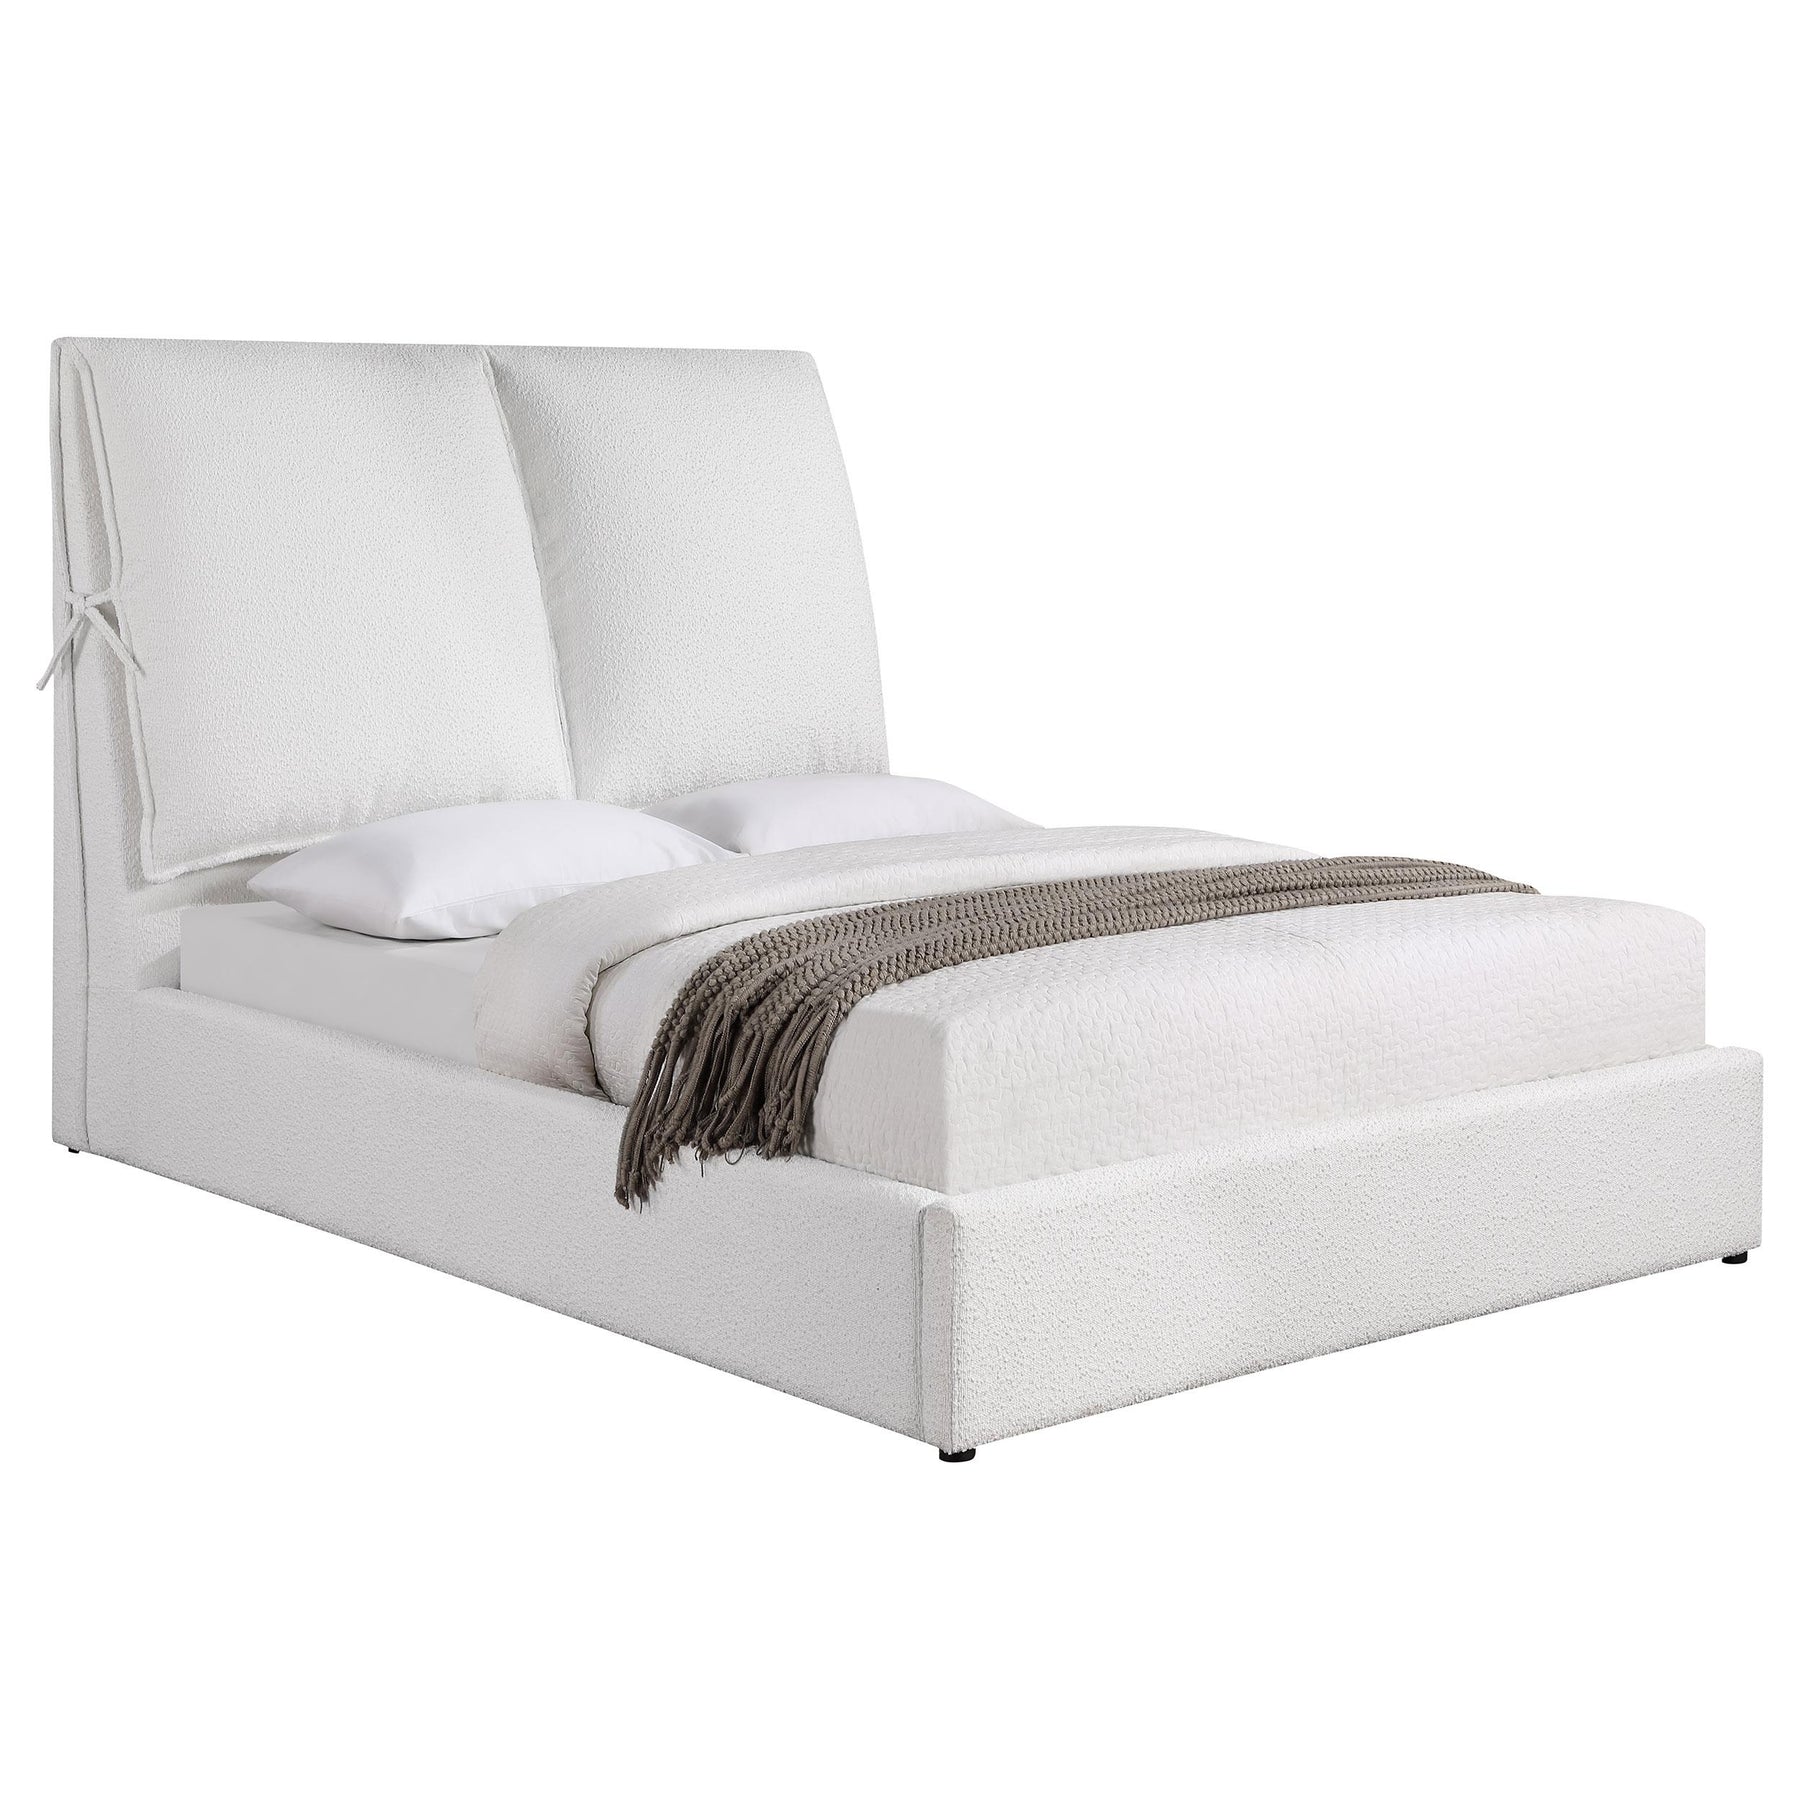 Gwendoline Upholstered Platform Bed with Pillow Headboard White - Half Price Furniture